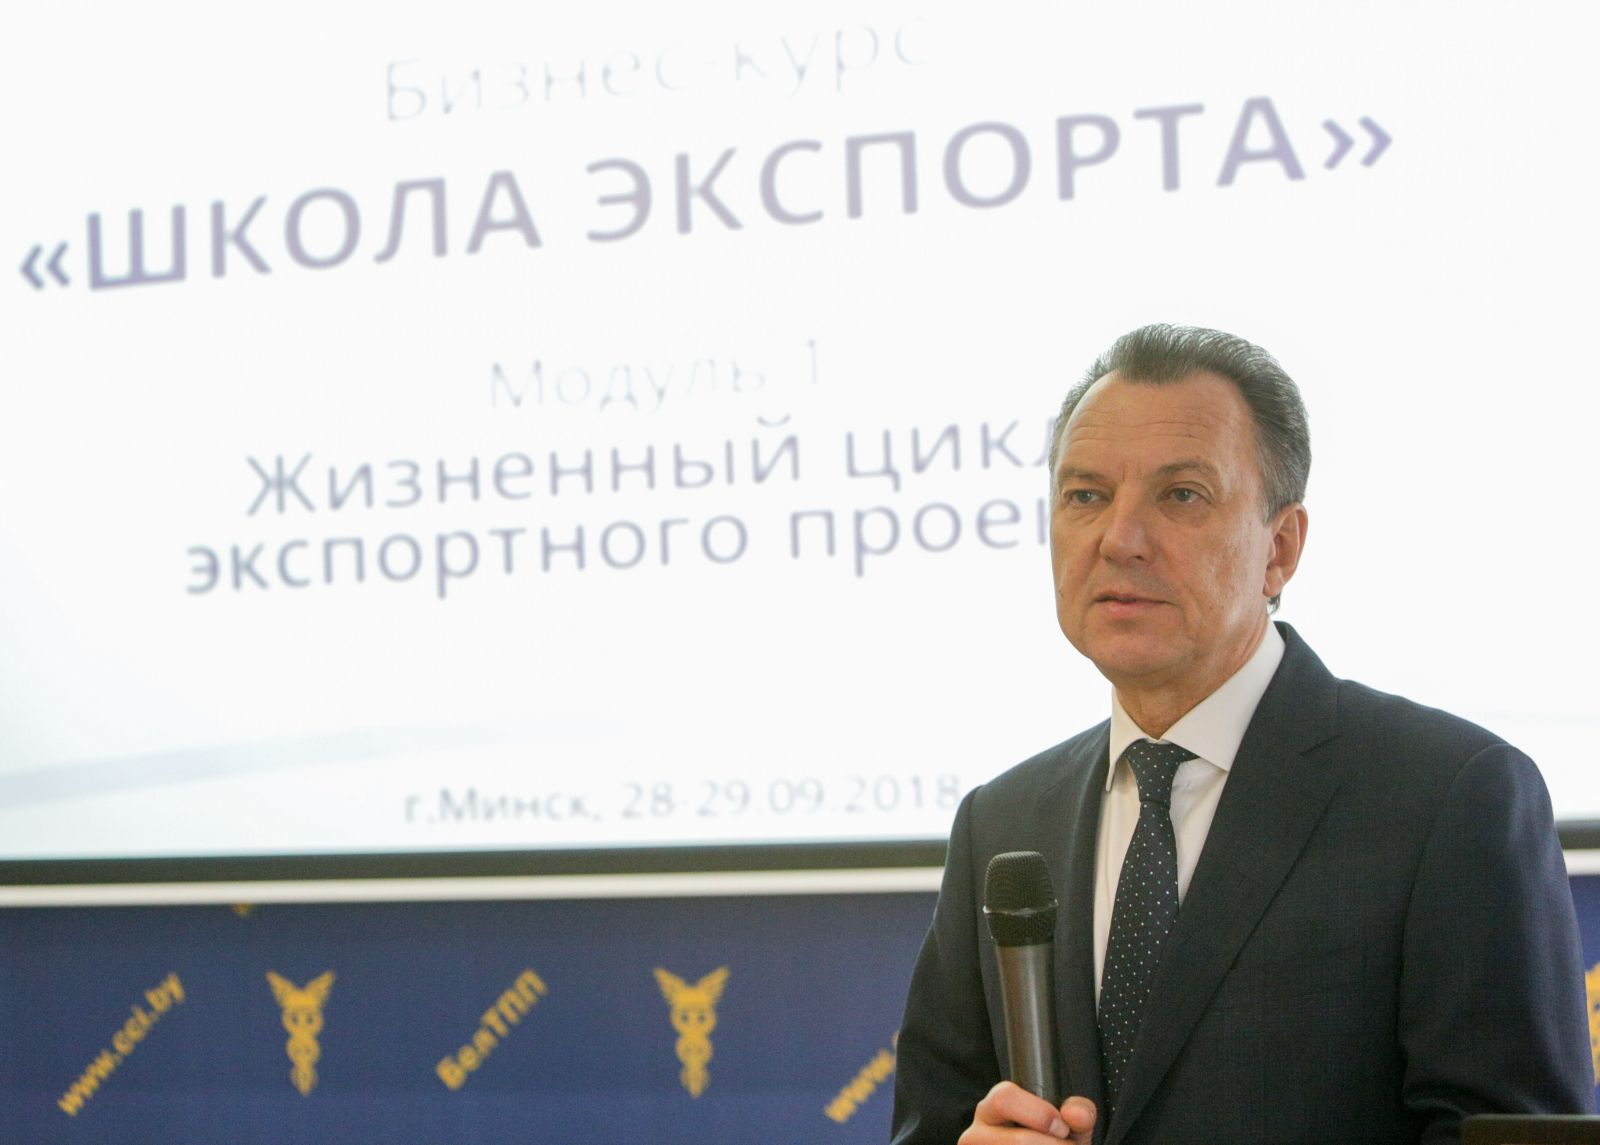 A new unique course of the Belarusian Chamber of Commerce and Industry "School of Export" has been launched